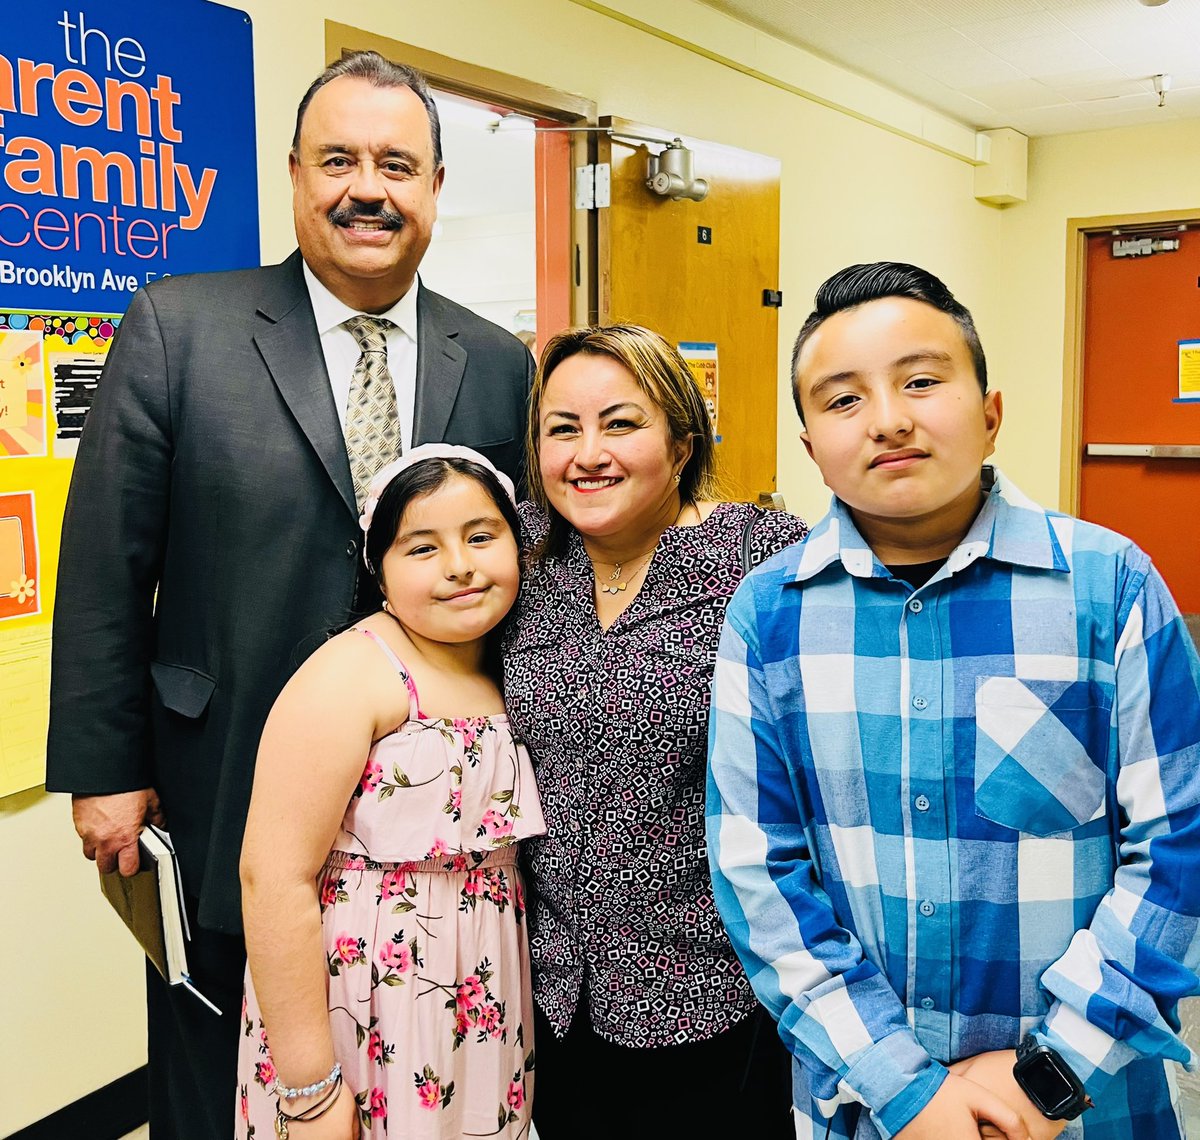 Celebrating Brooklyn Avenue School’s Gold Award for PBIS, the first school at @LASchools to achieve this honor. Plus, we had the opportunity to join the ribbon cutting for the new Parent & Family Center and wellness room. 🎉 #CommunityPride #EducationExcellence